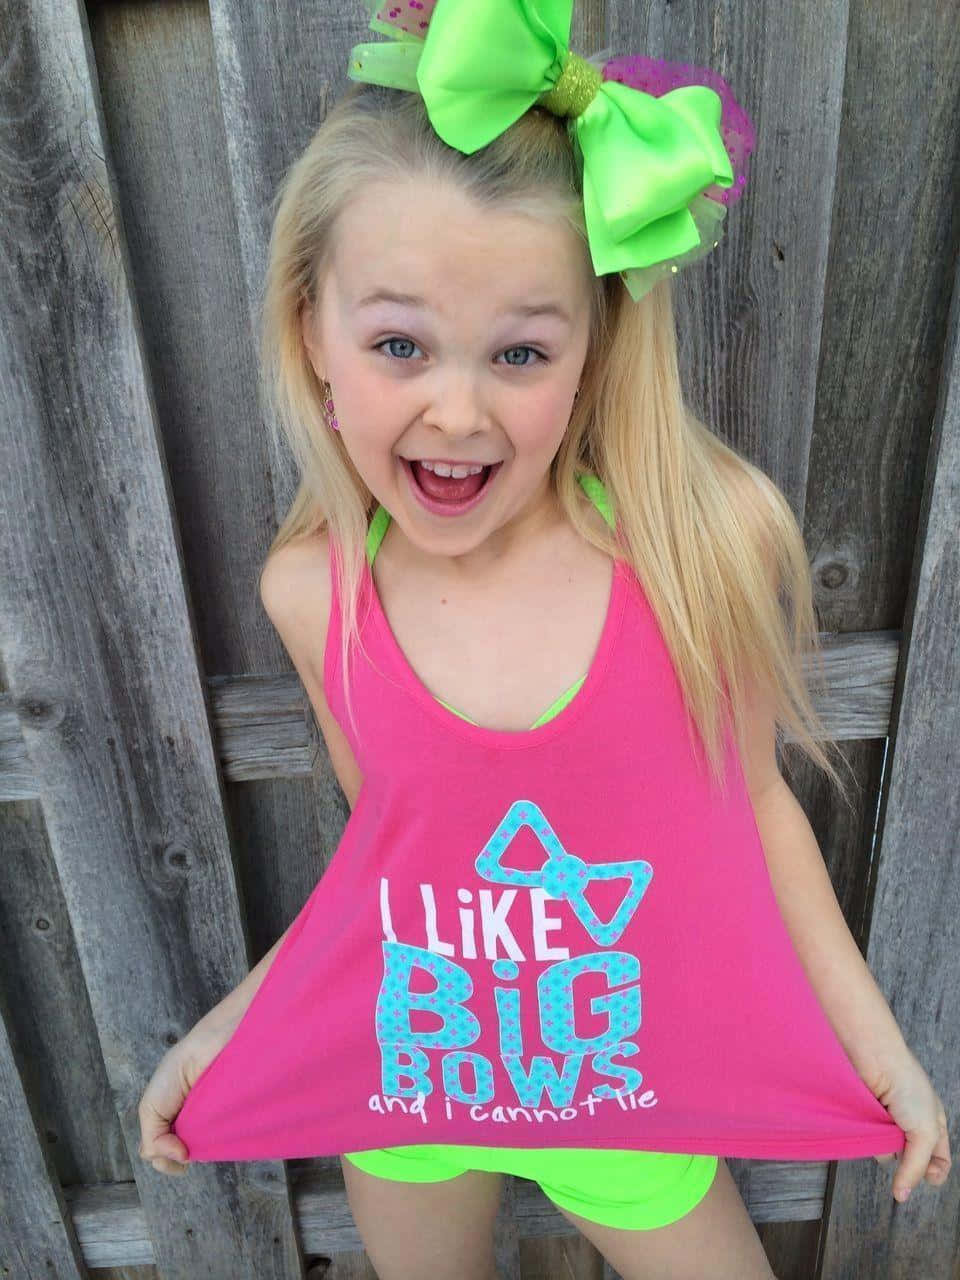 Jojo Siwa Captures the Spotlight With Bold T-shirt, Bow and Sparkles